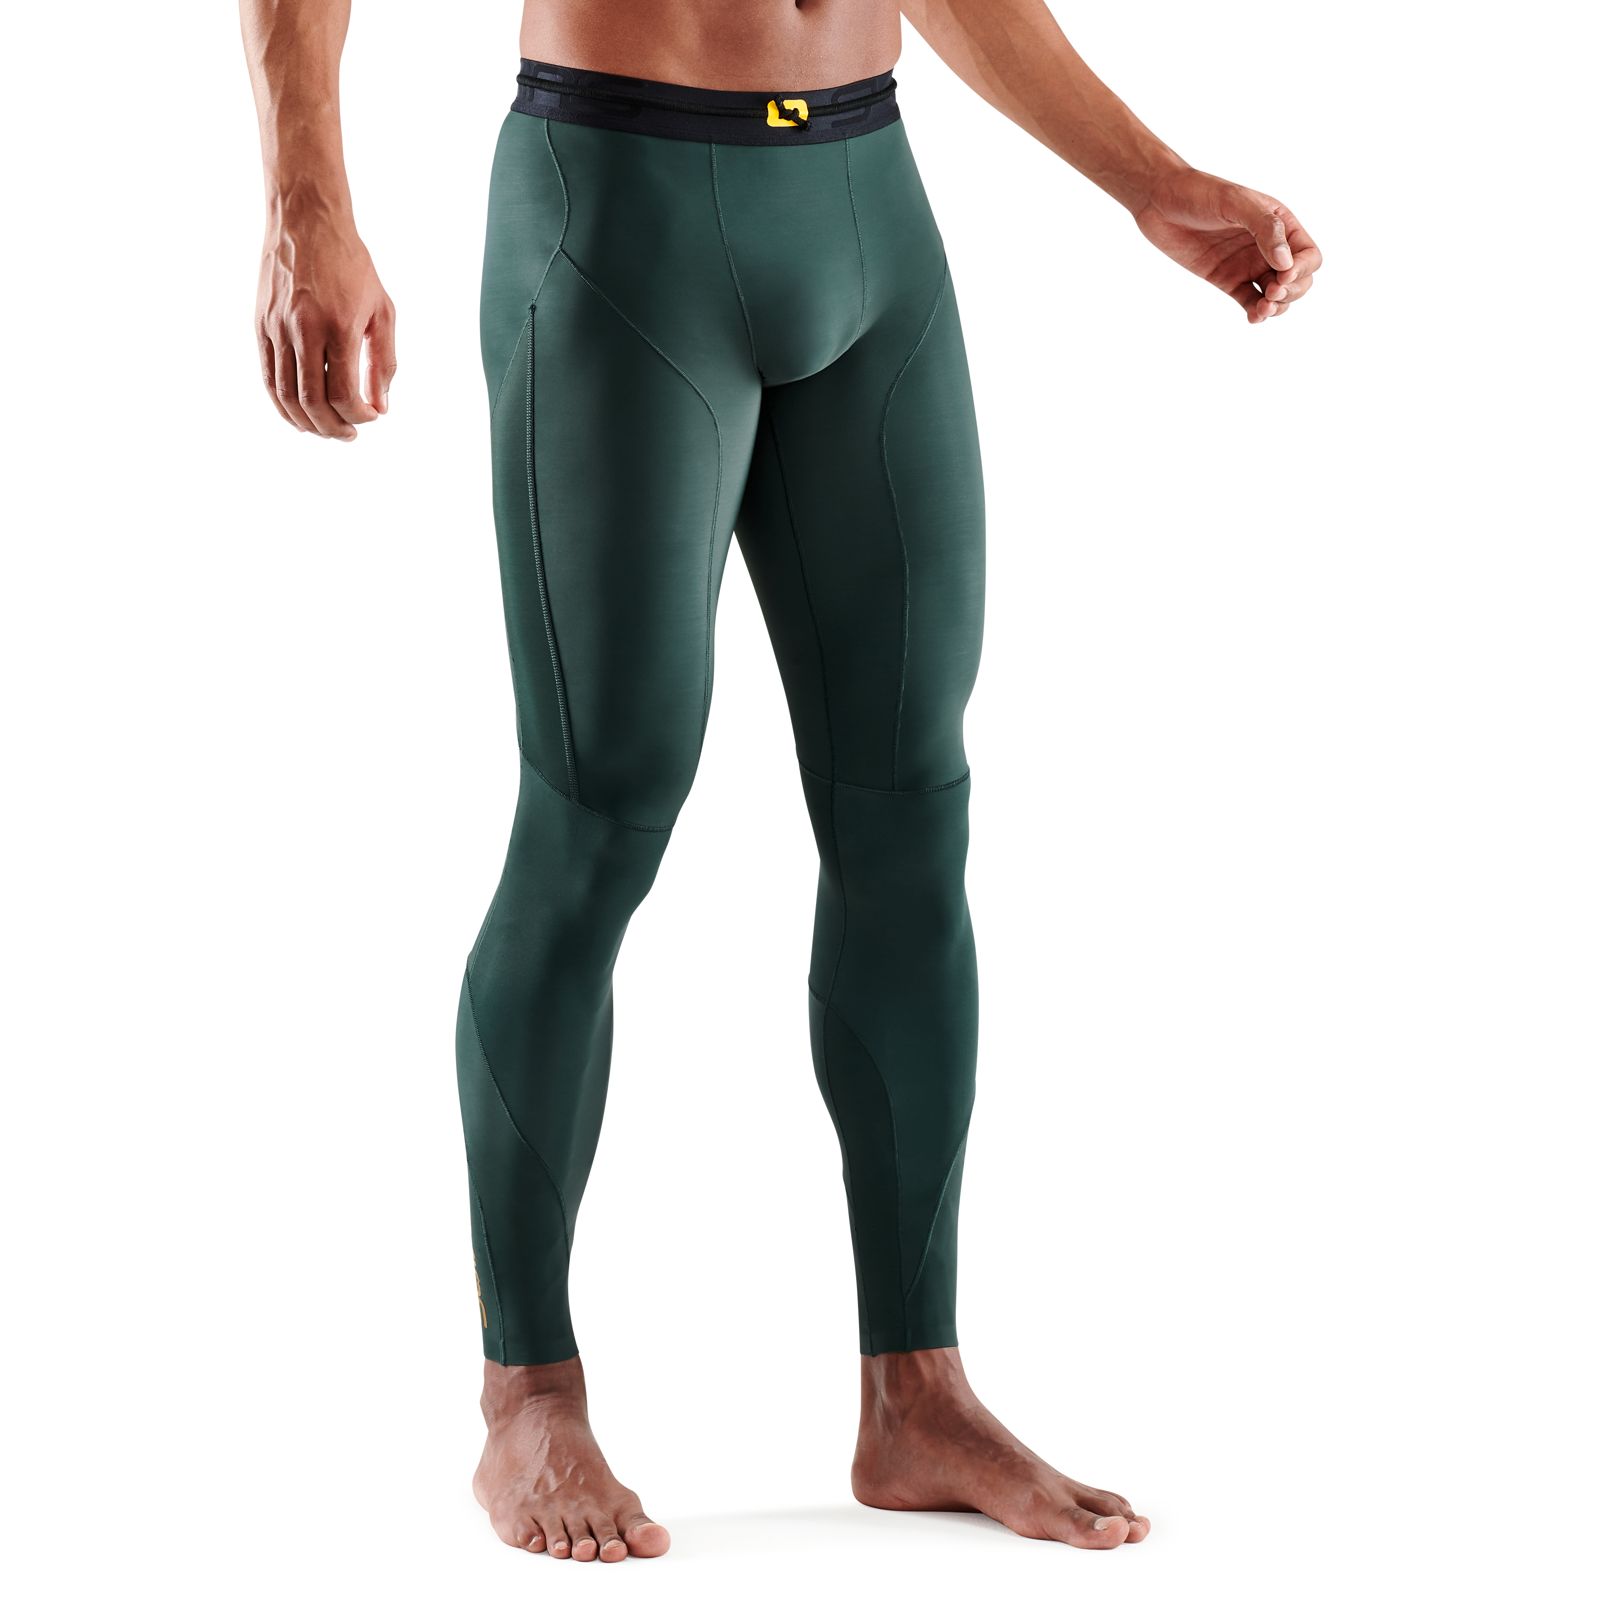 Fdx B5 Men's All Weather Compression Tights Green